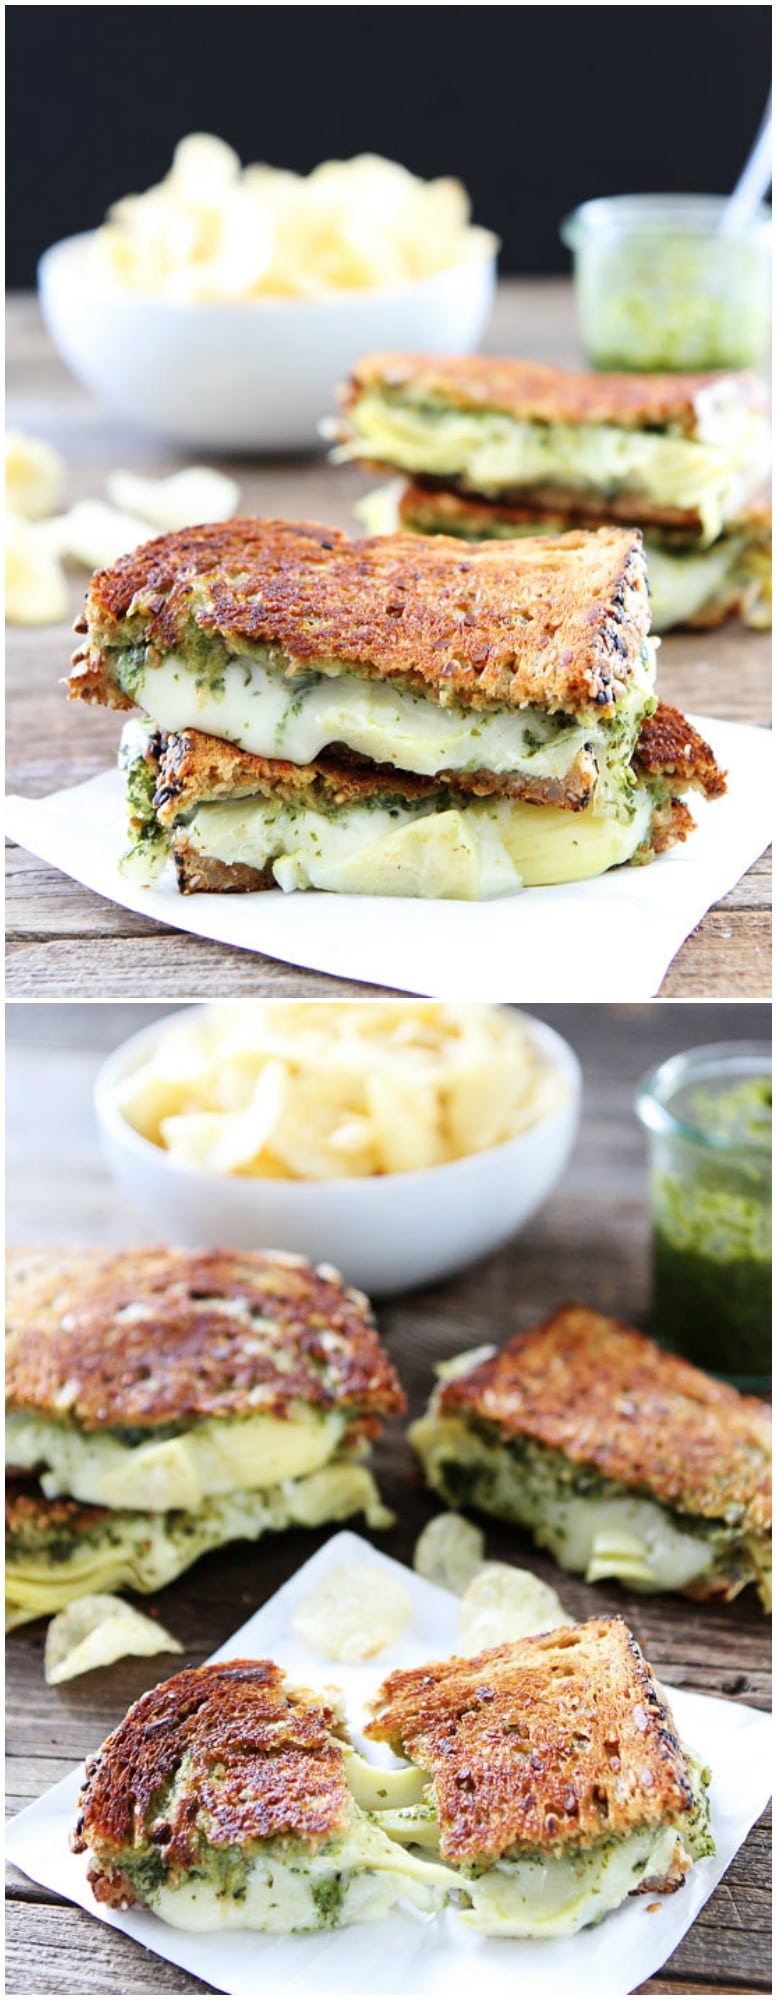 Pesto, Artichoke, and Havarti Grilled Cheese Recipe on twopeasandtheirpod.com This grilled cheese is bursting with flavor! A MUST make!